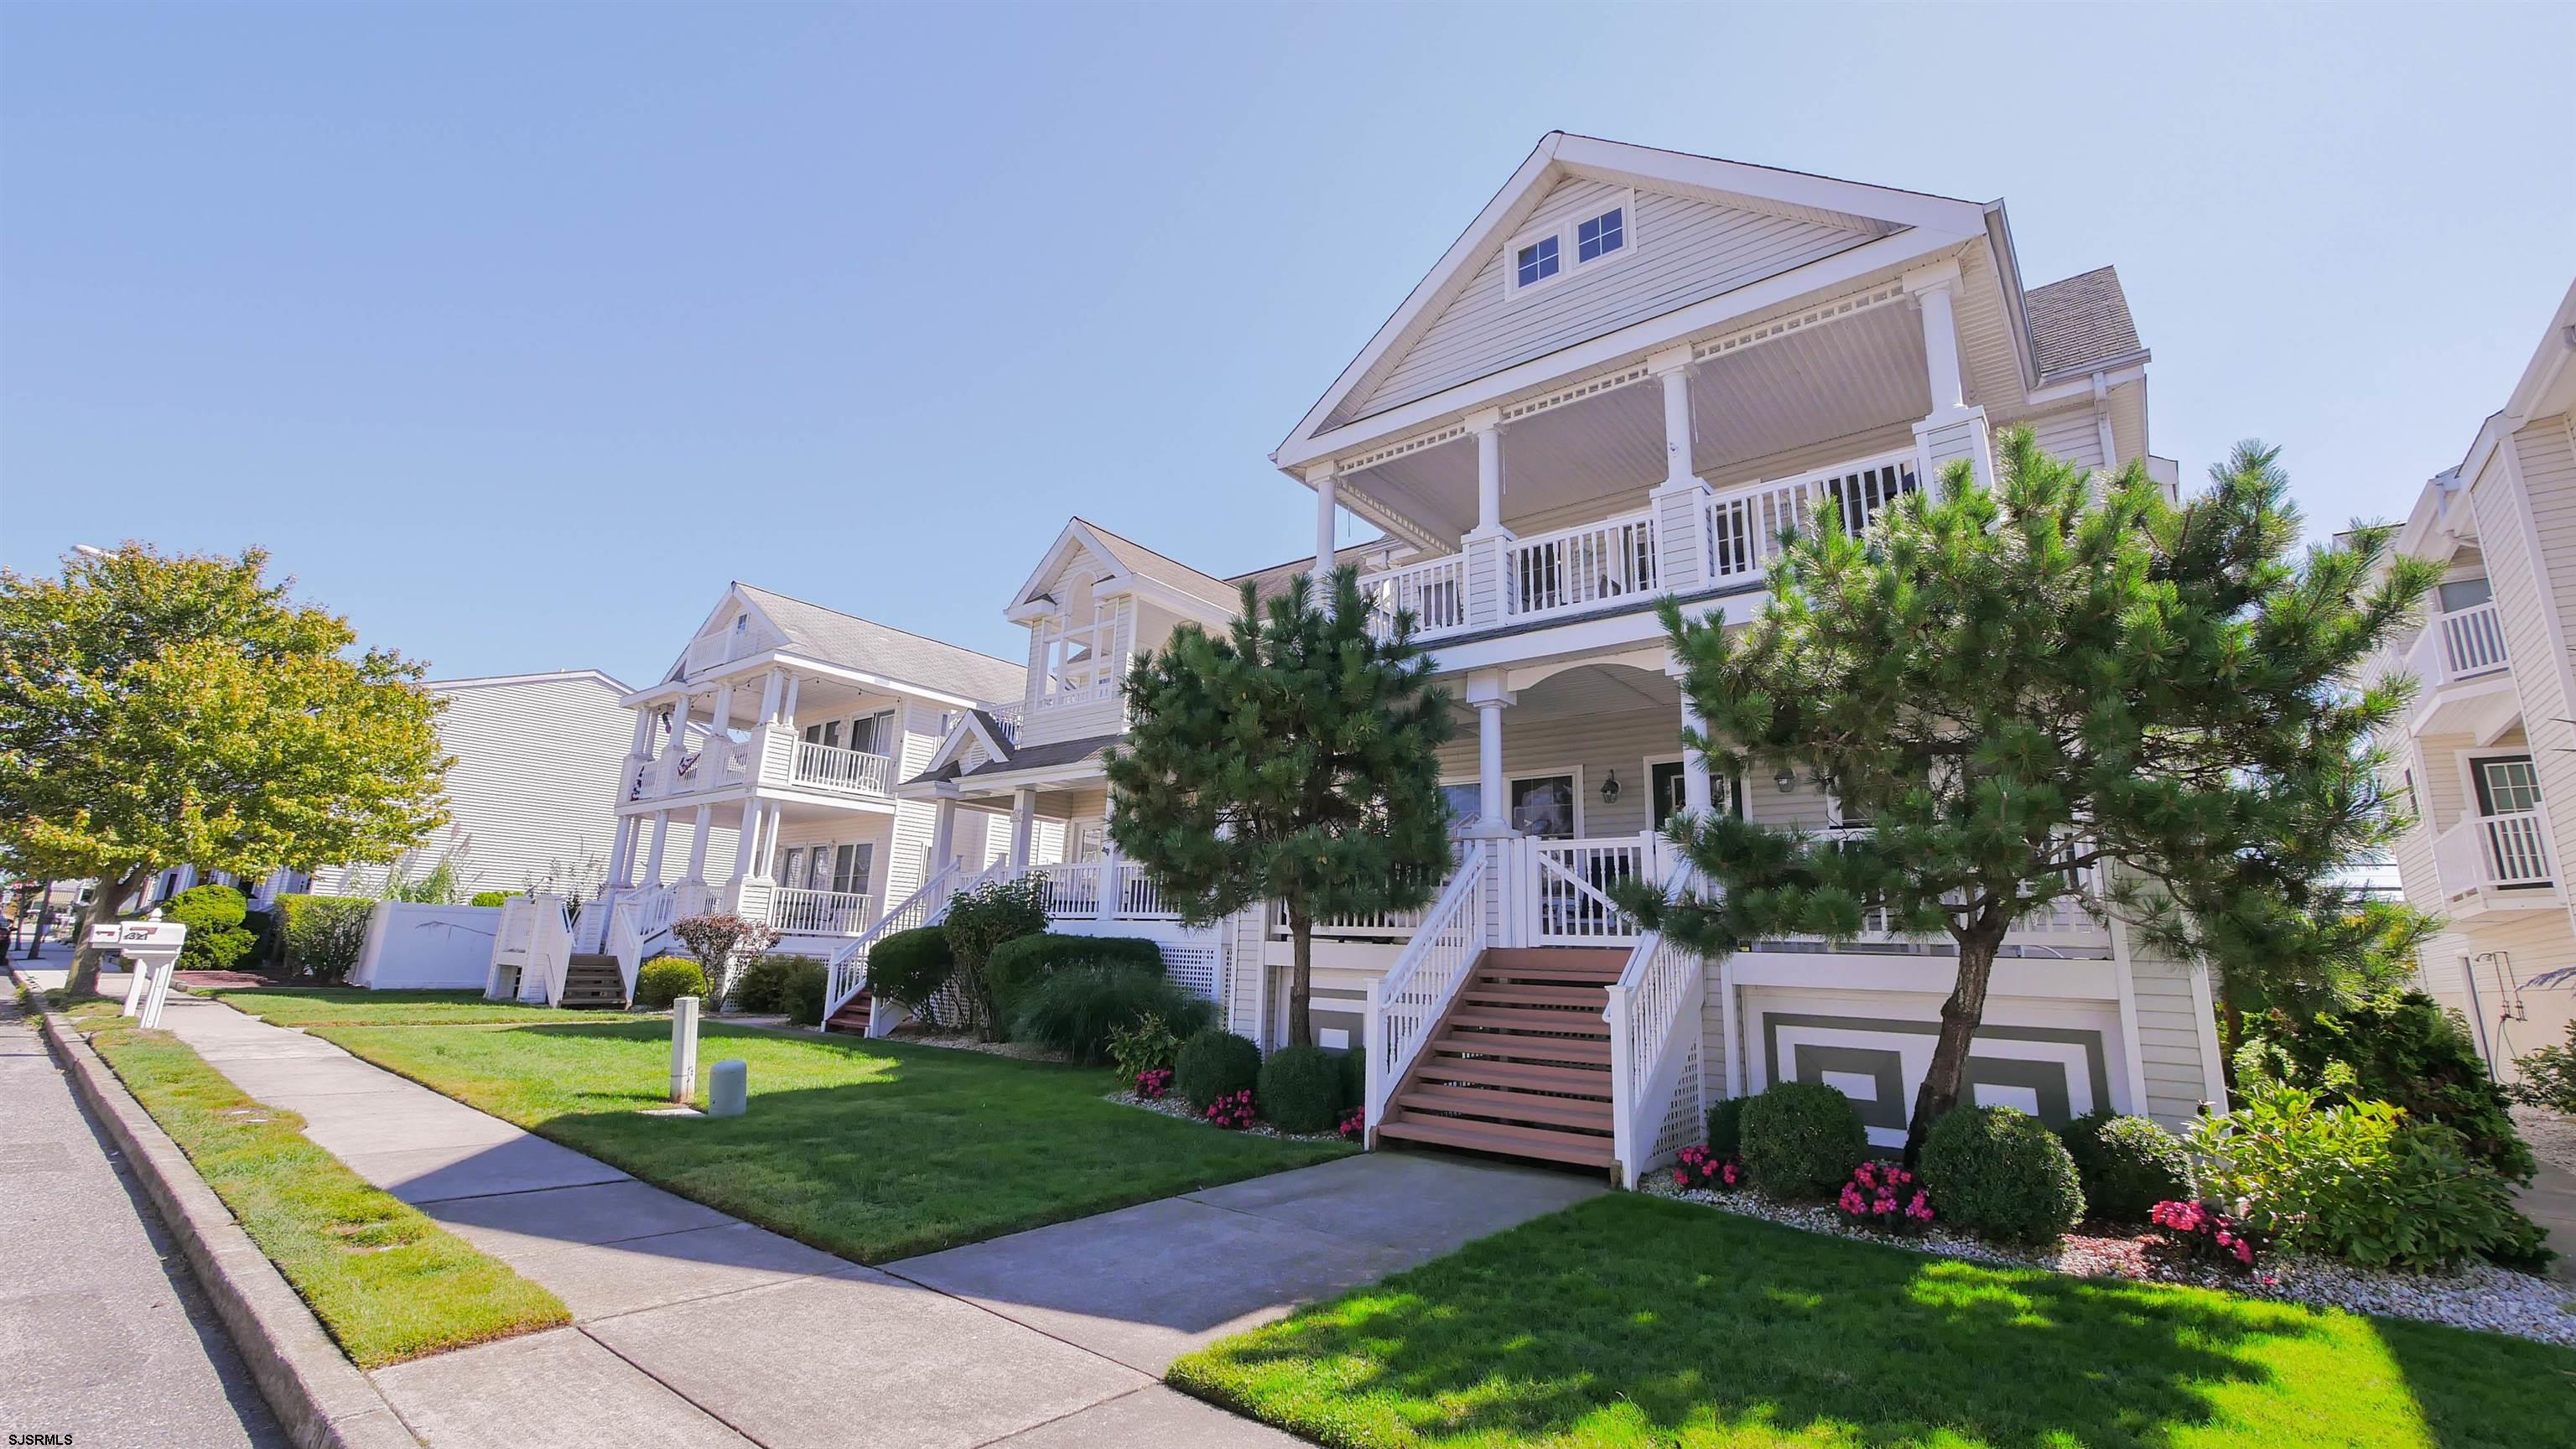 Ocean City, NJ Real Estate Housing Market & Trends | Better Homes and Gardens<sup>®</sup> Real Estate